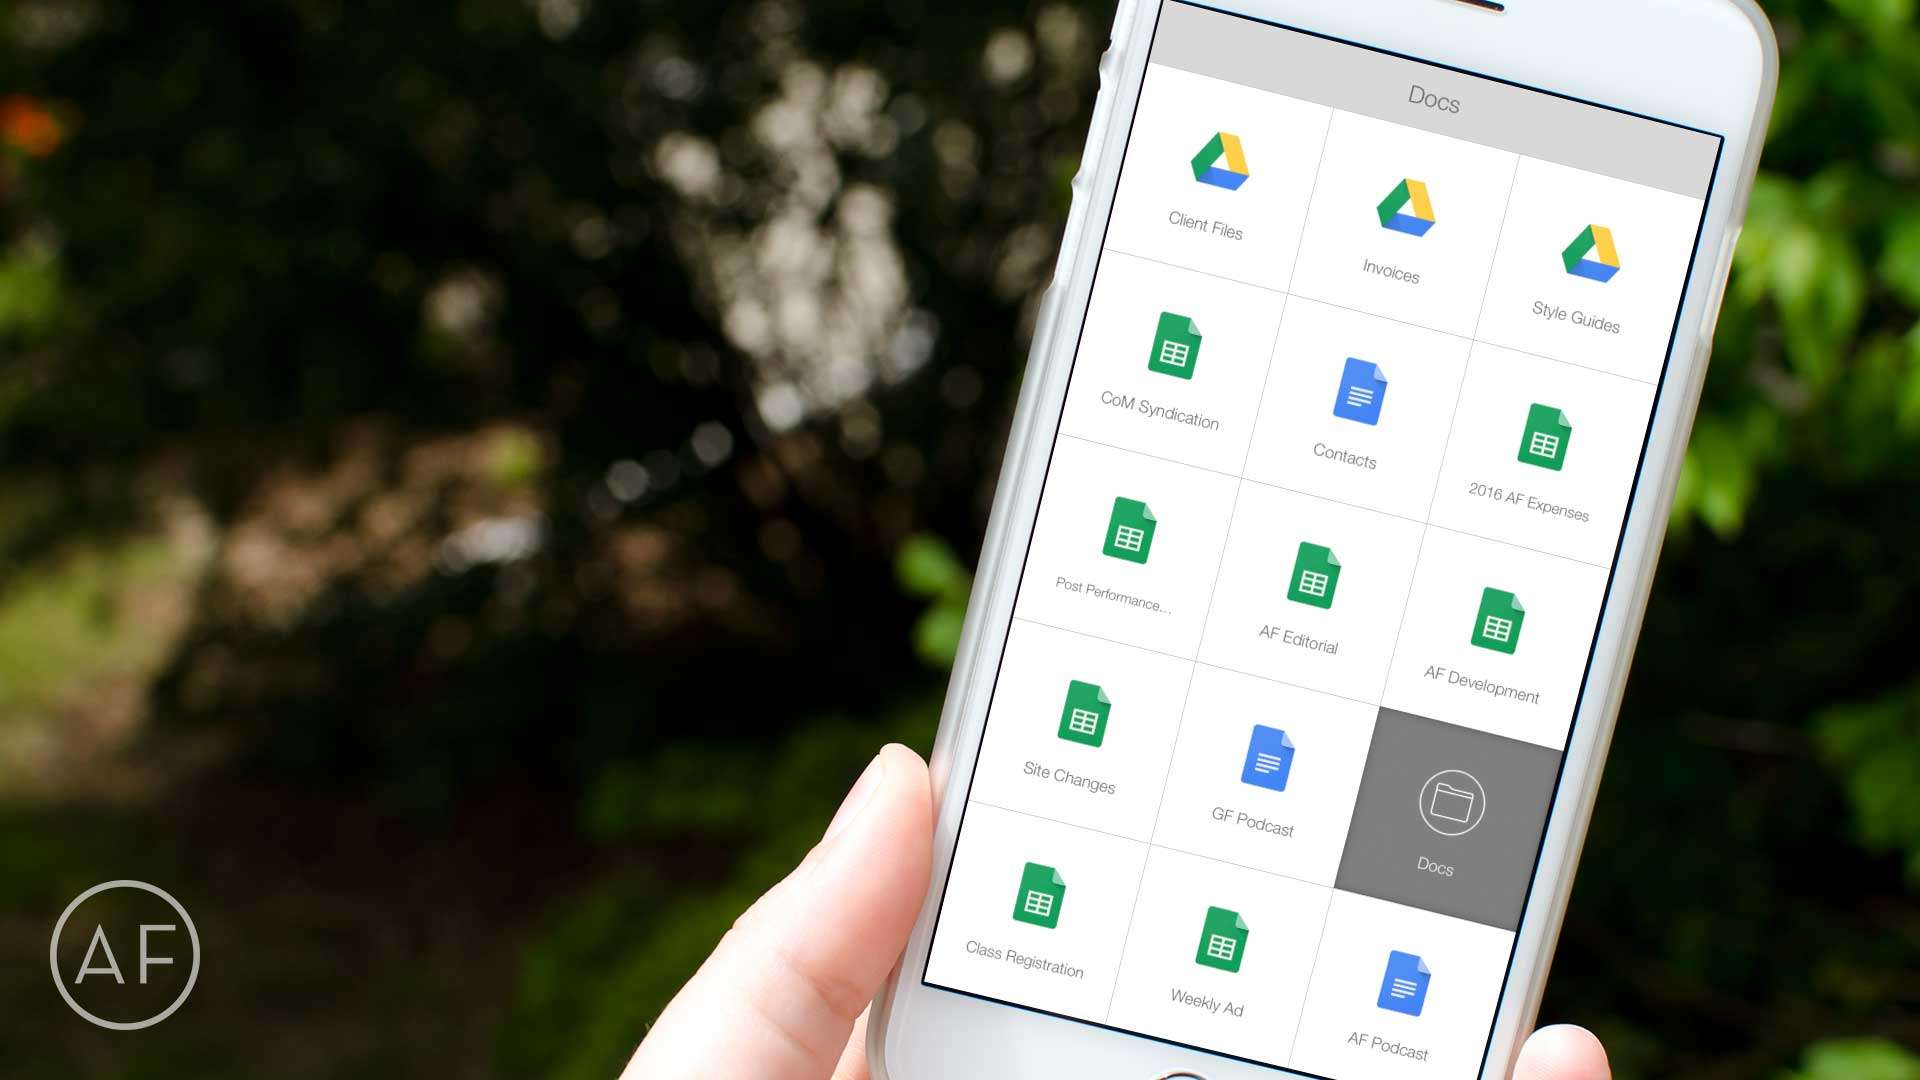 Want even faster access to your most-used Google Drive files? Let Launch Center Pro do the heavy lifting!